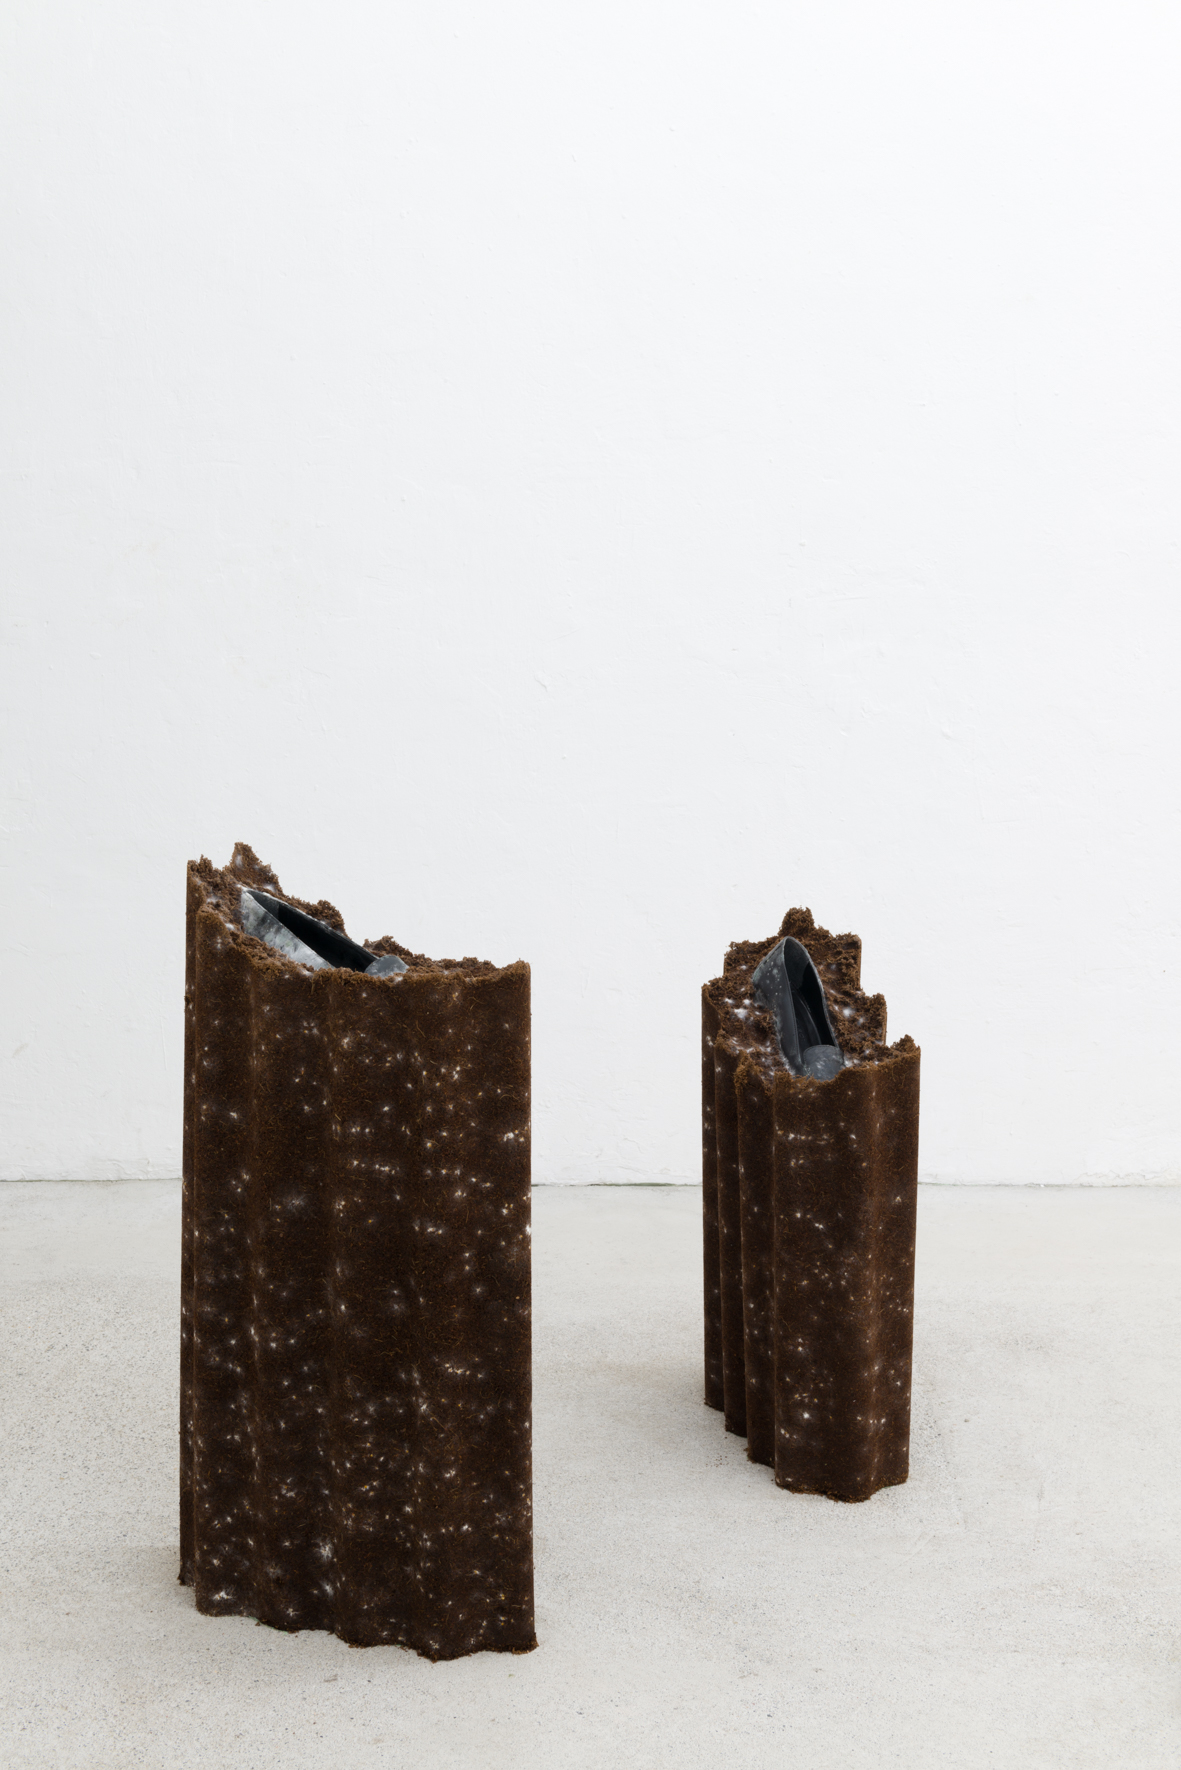 Angelika Loderer: Animate, 2020; coconut substrate, mycelium, leather shoes